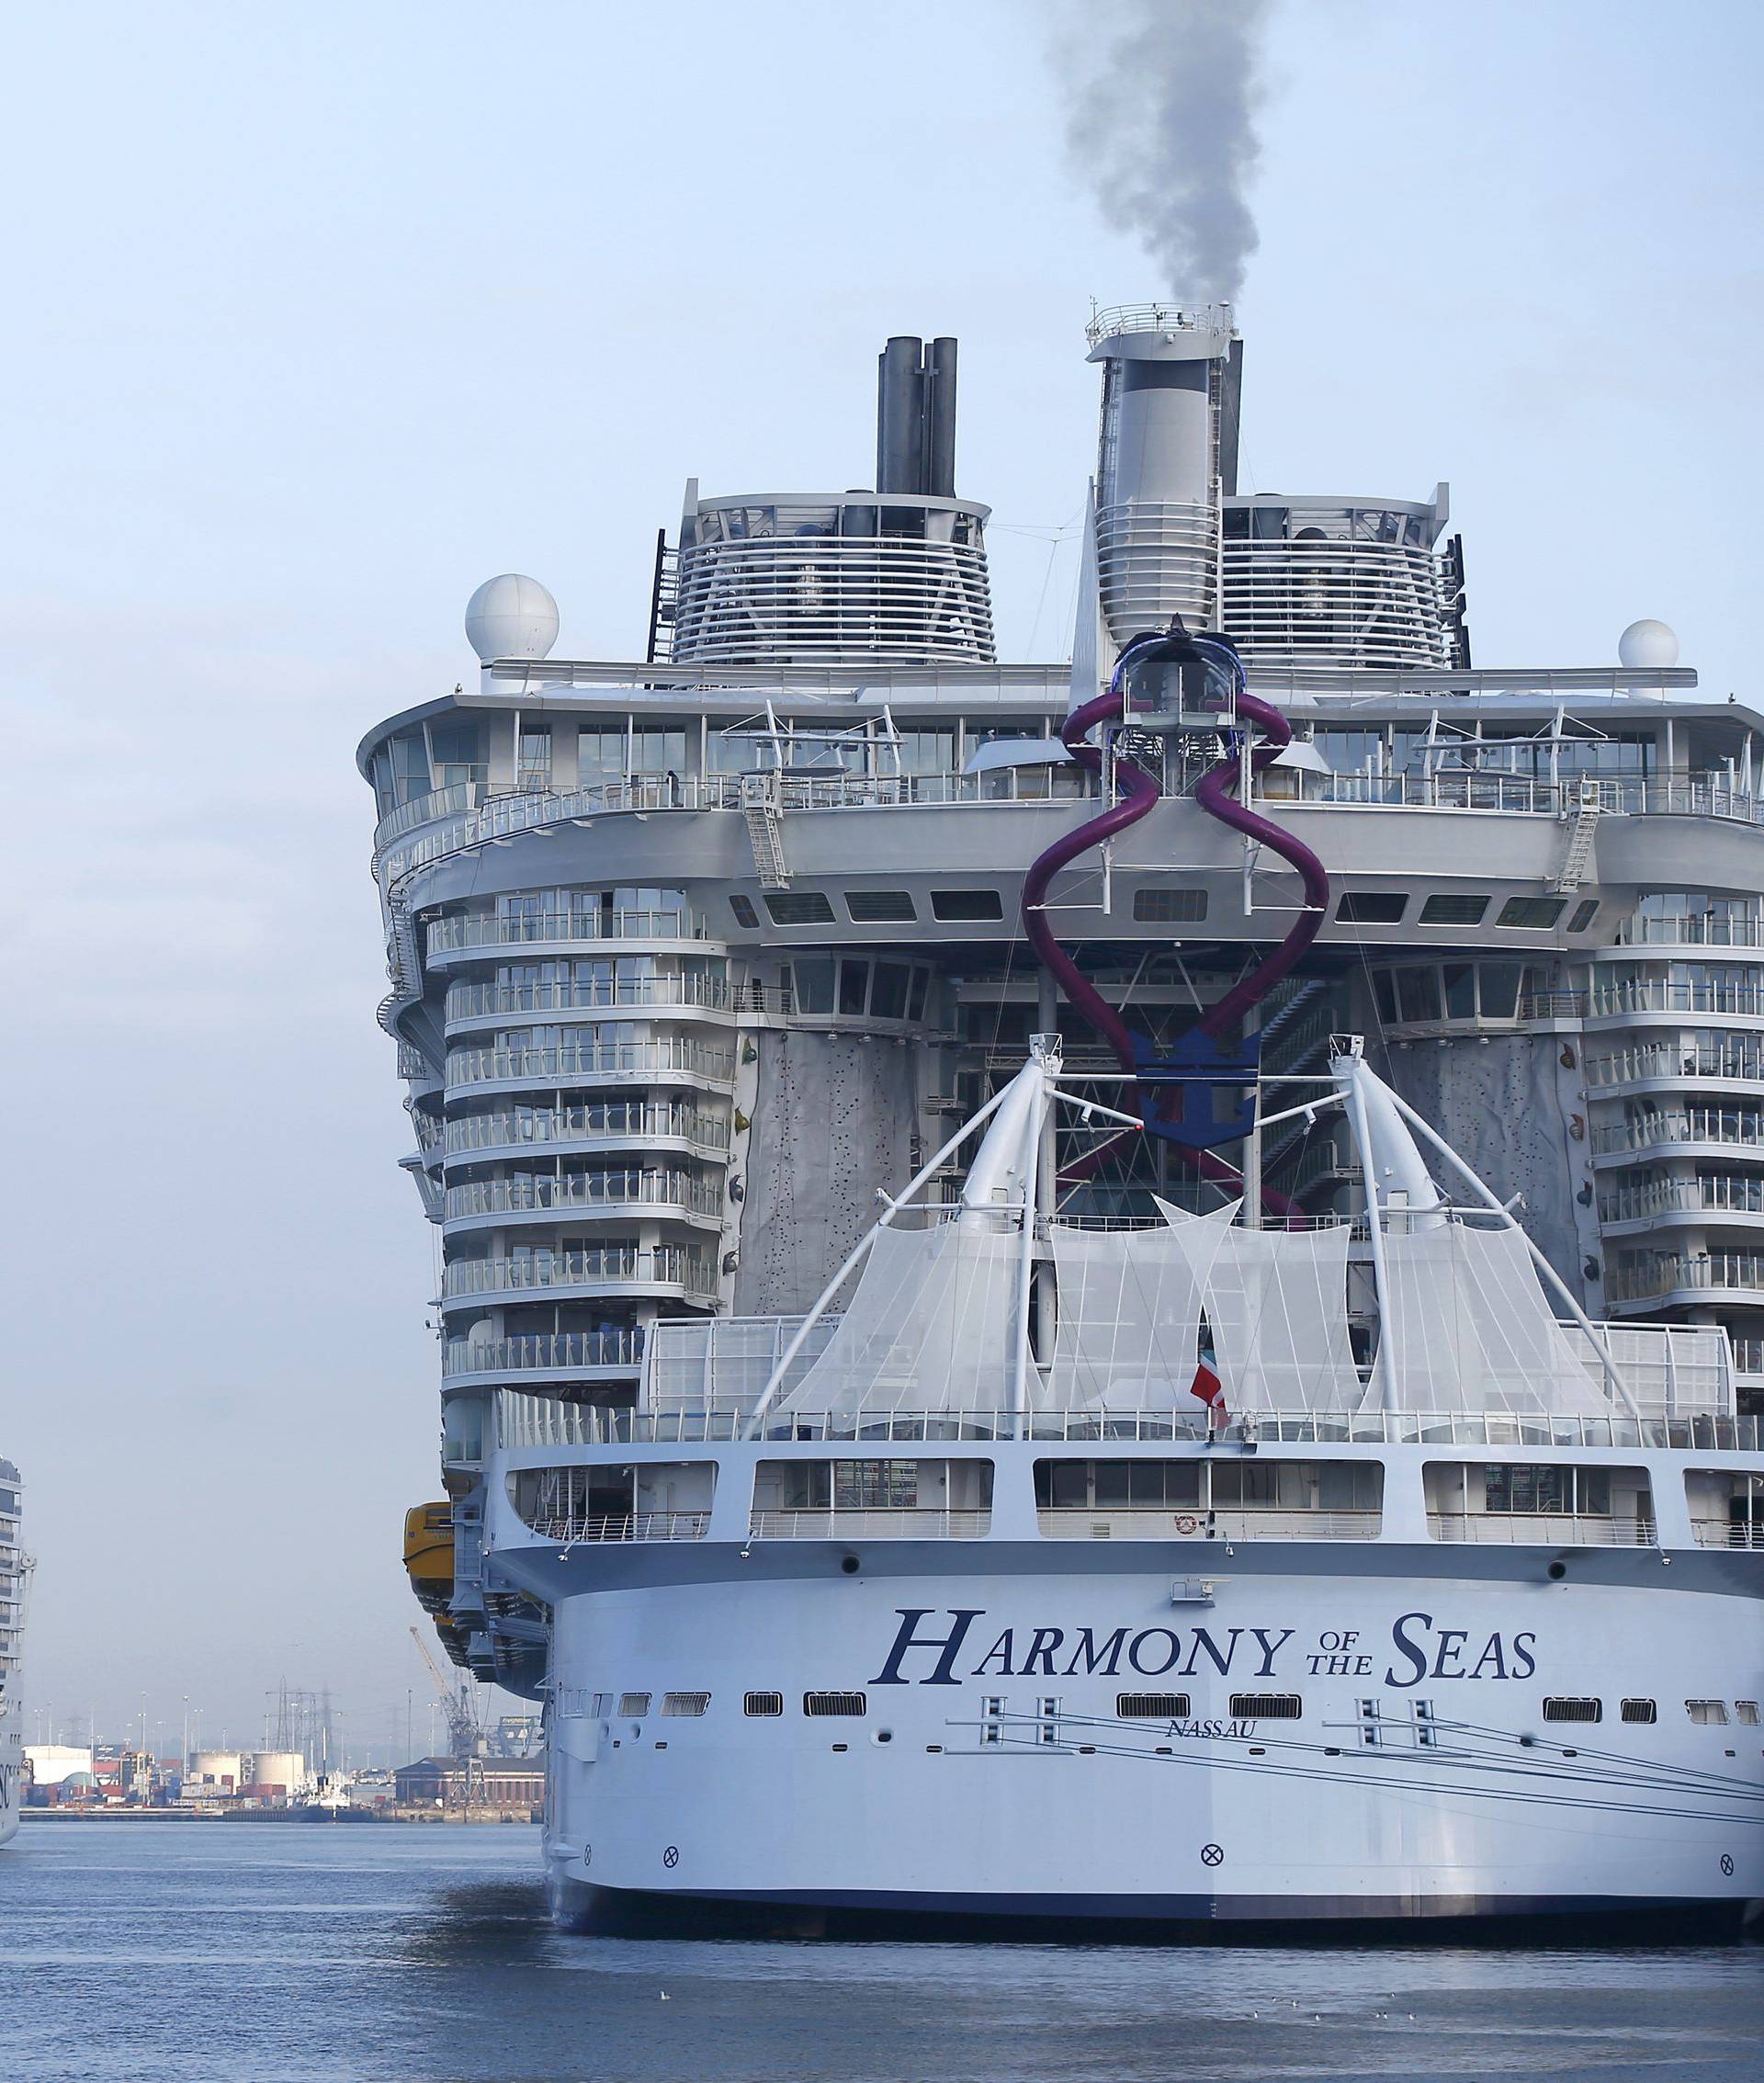 The worlds largest cruise ship, the 361 metres long, Harmony of the Seas (R), moored at its' berth as cruise ship MSC Splendida (L), sails into port alongside it in Southampton